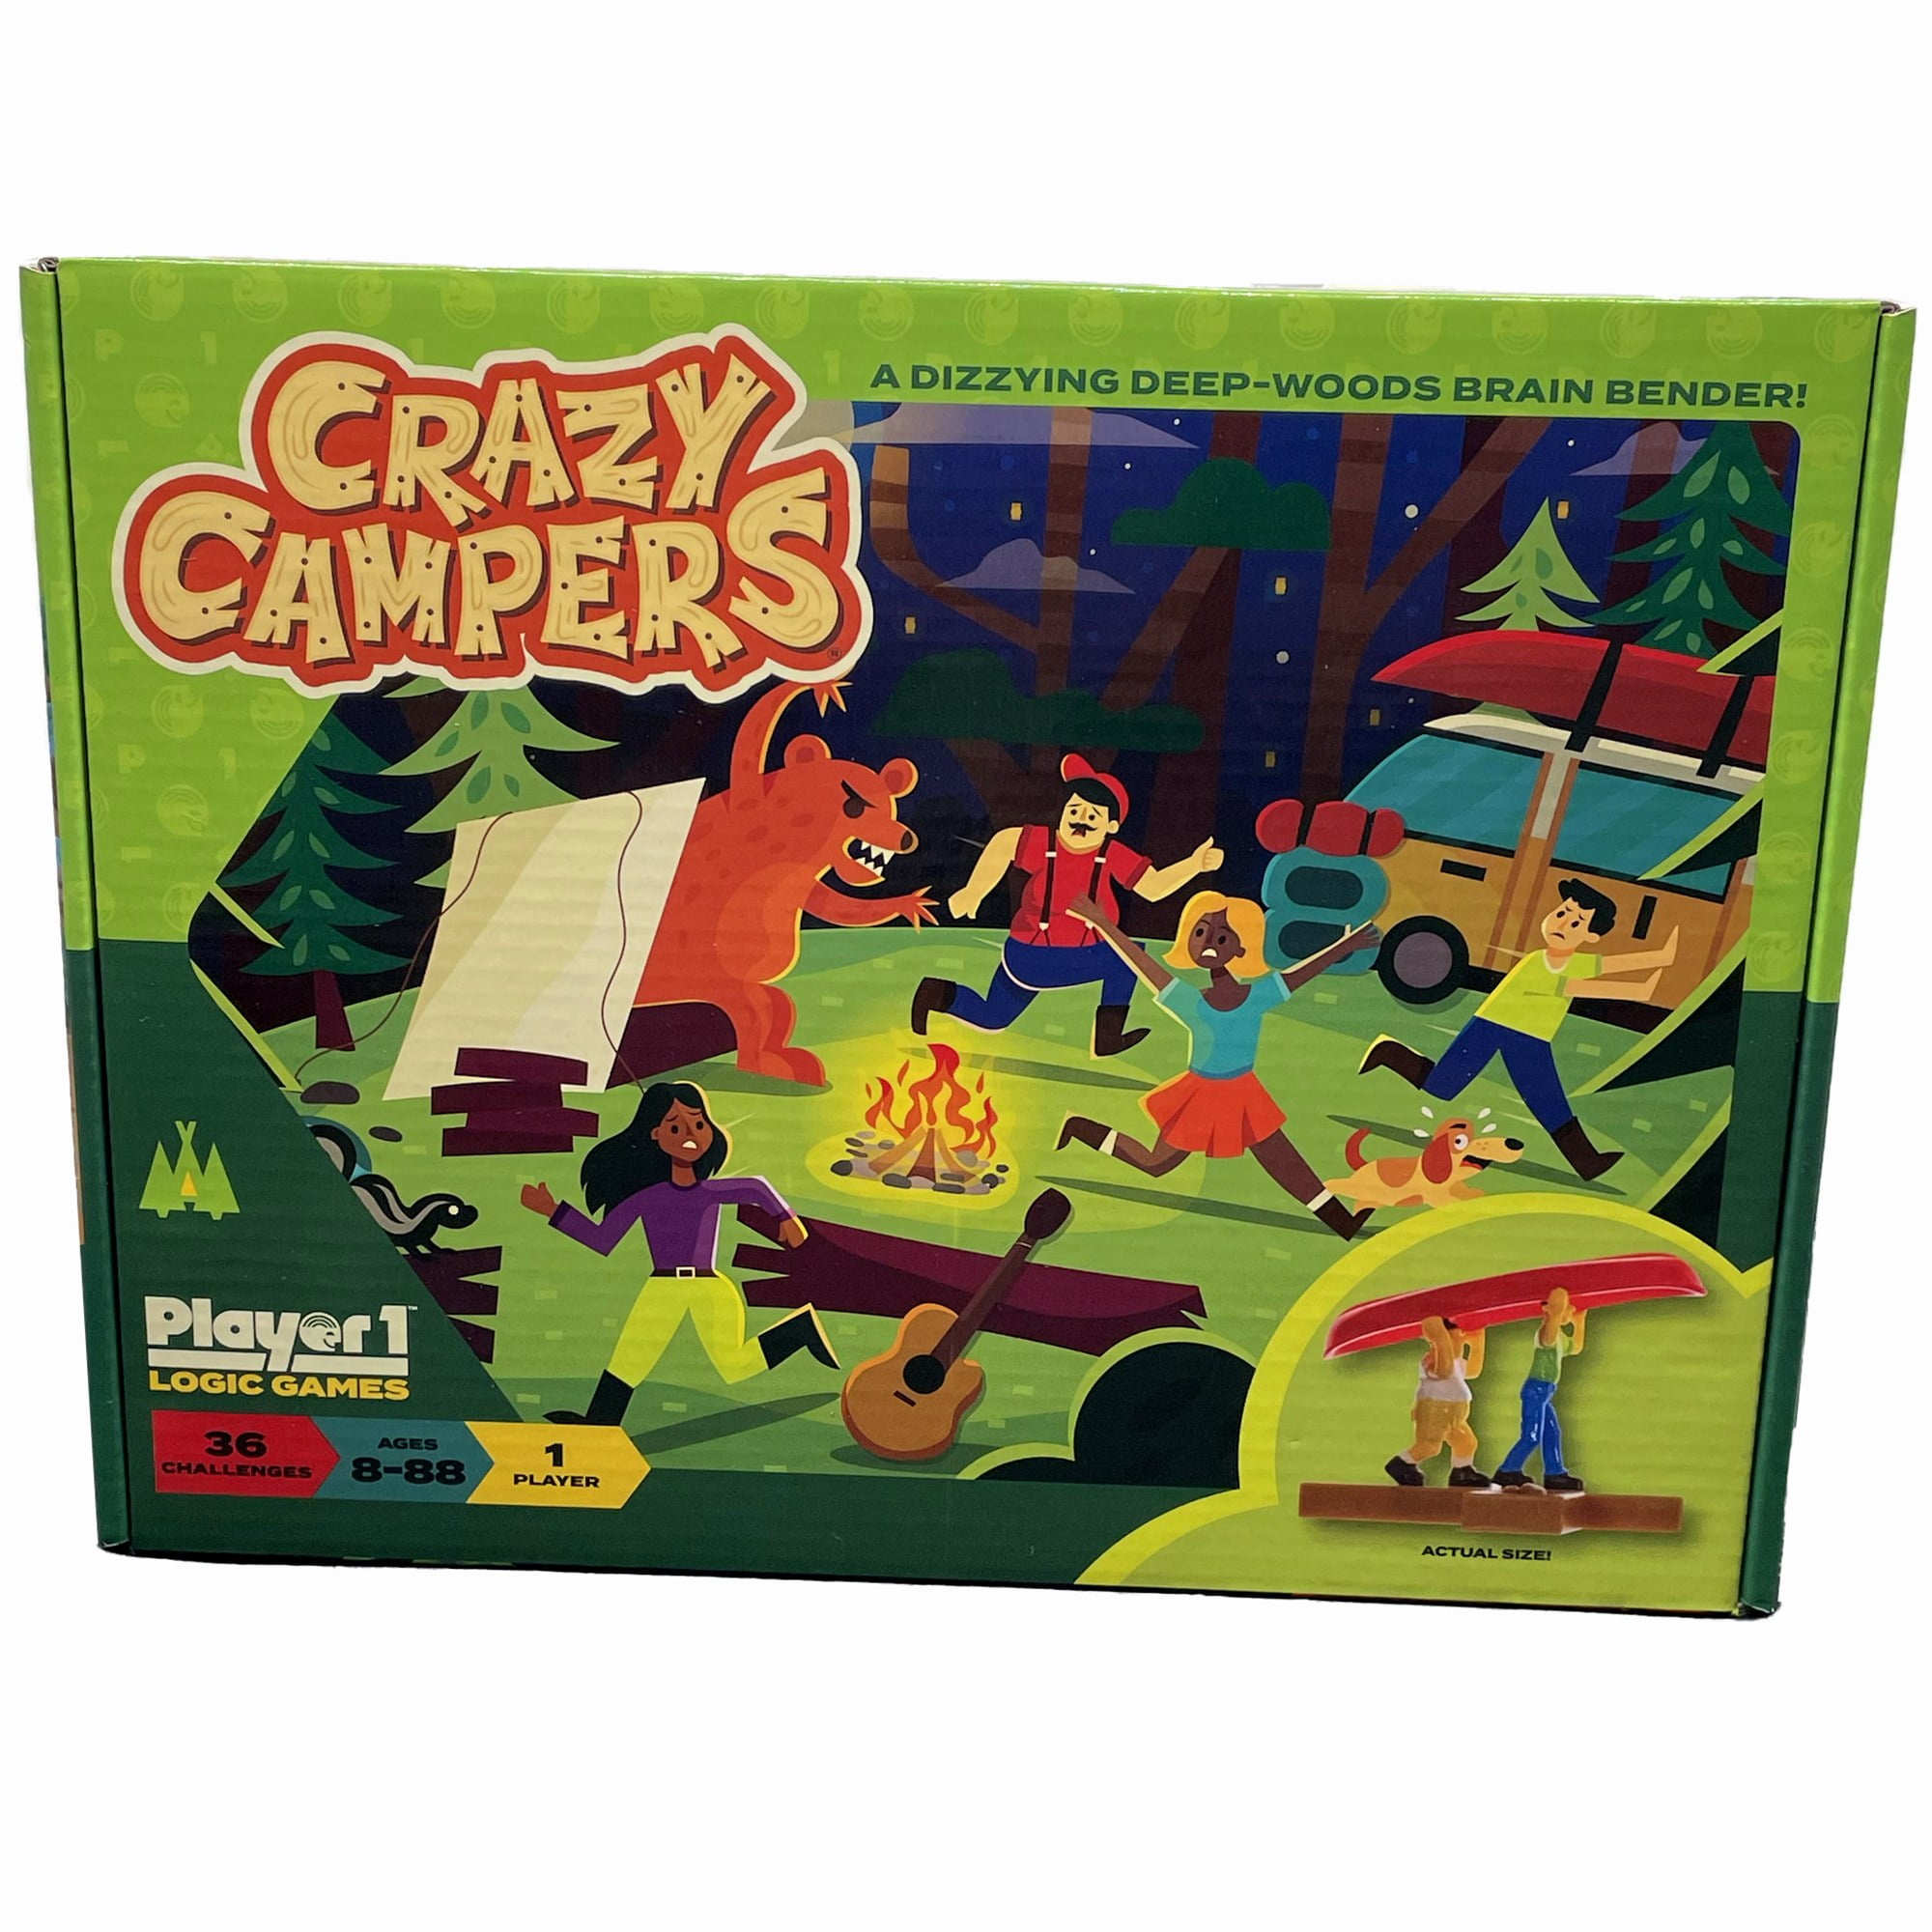 Culture Crazy Game by The Green Board Game Co. Age 8+ 2 - 4